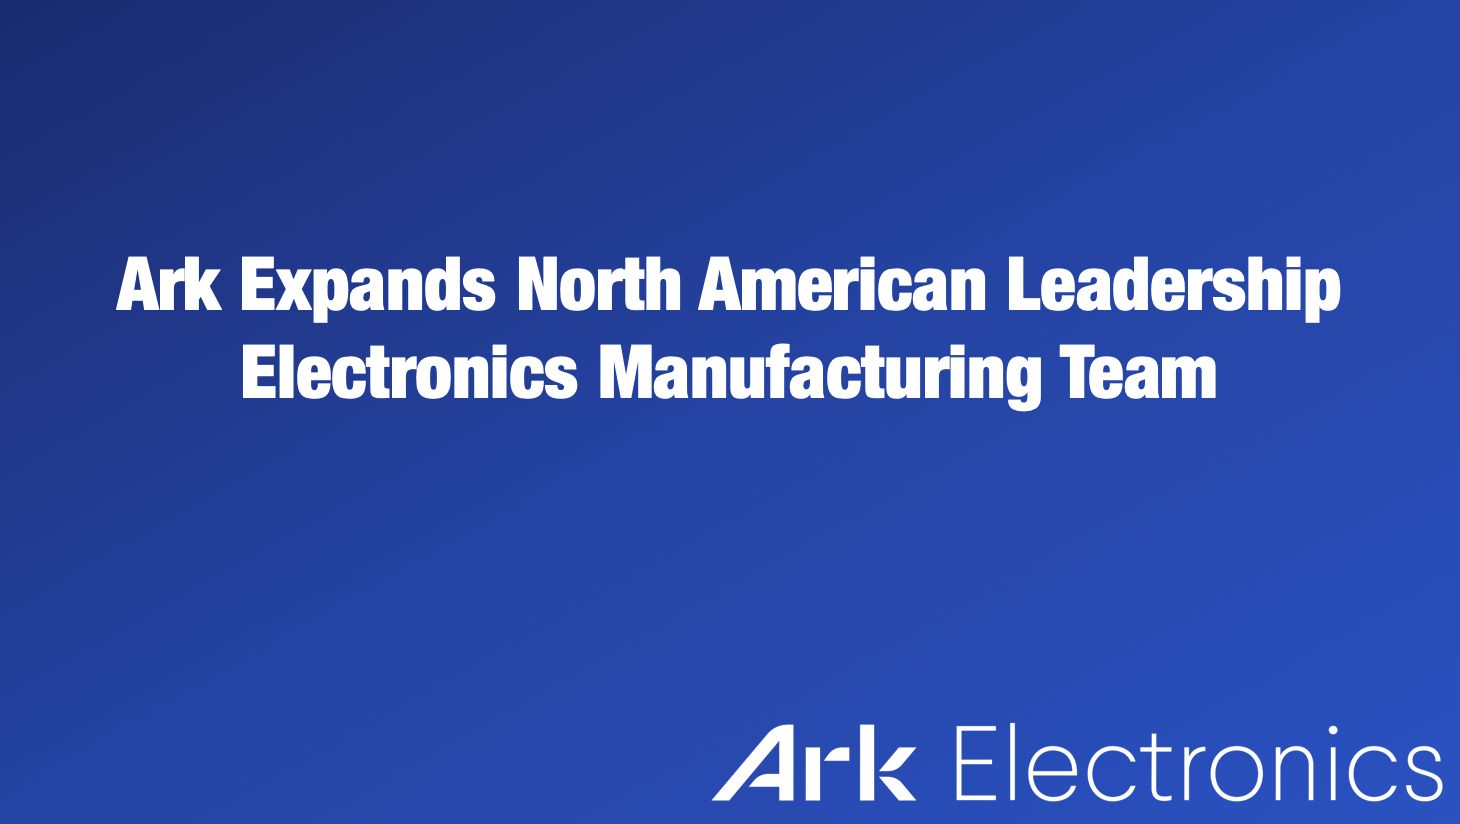 Ark Electronics Manufacturing Expands North American Leadership Team